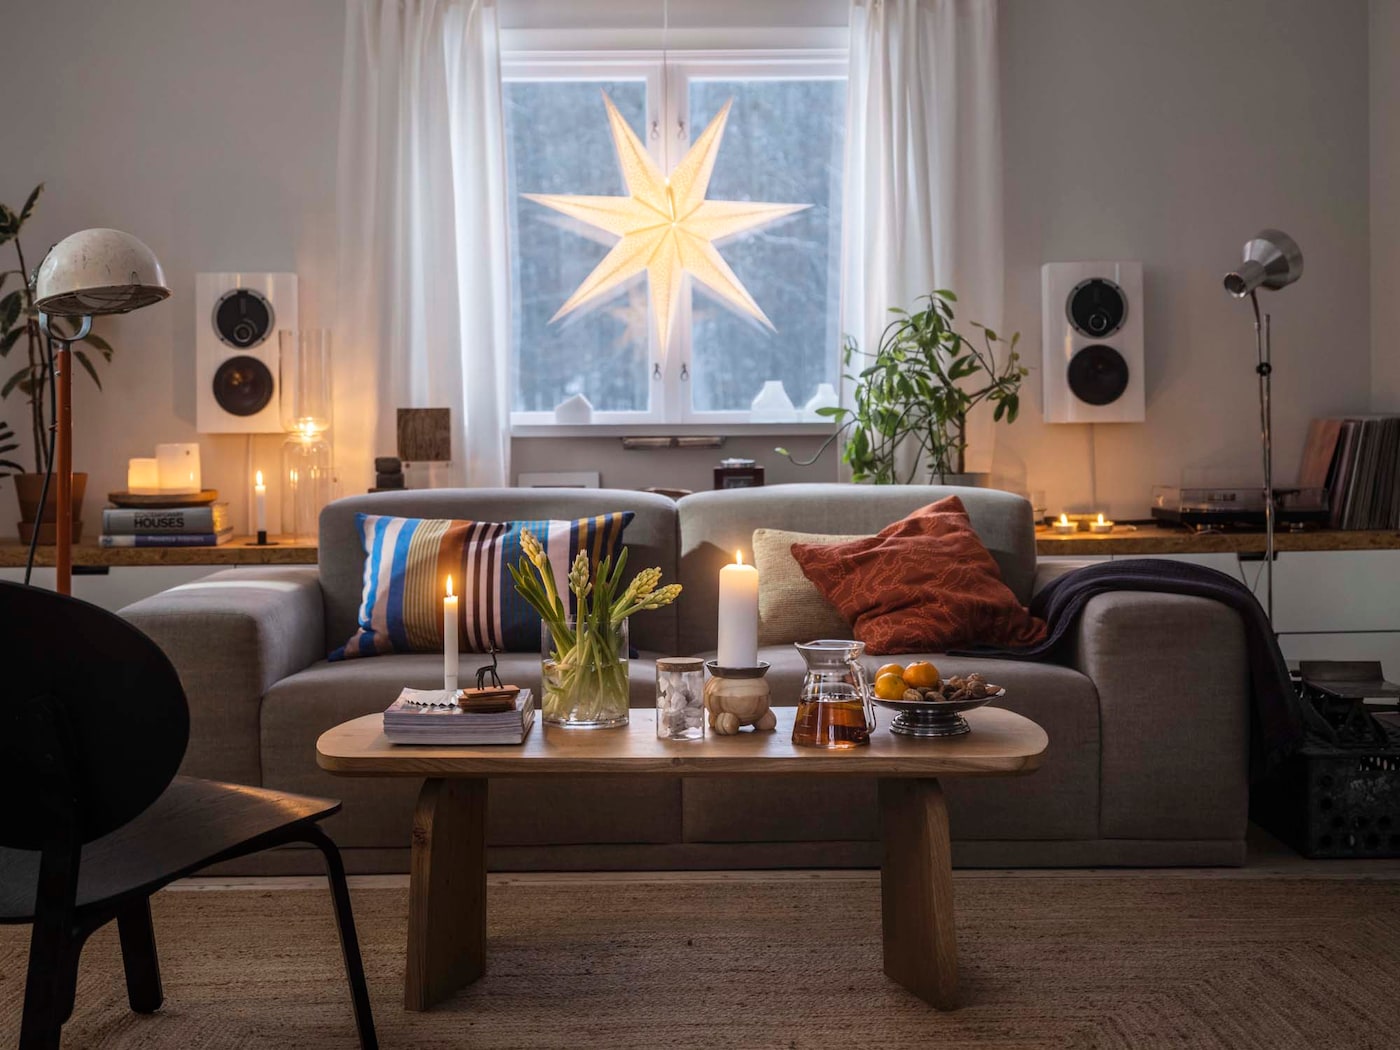 Cosy, dimly lit living room with a wide sofa, coffee table decked with candles and flowers, and a paper star hanging in the window in the background.